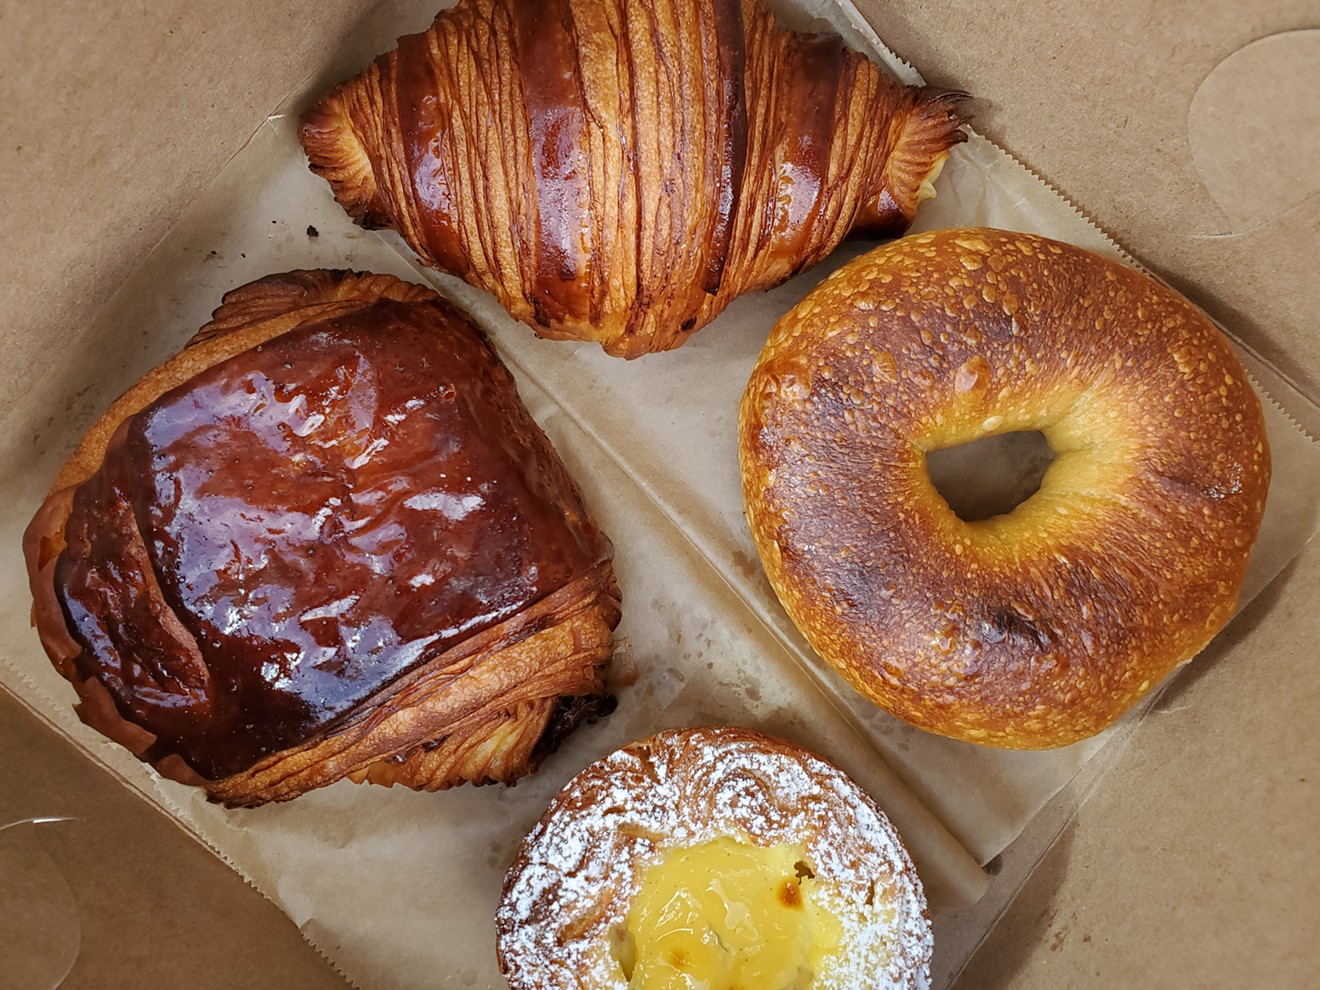 What should you order at Bakery Four? Follow your heart.